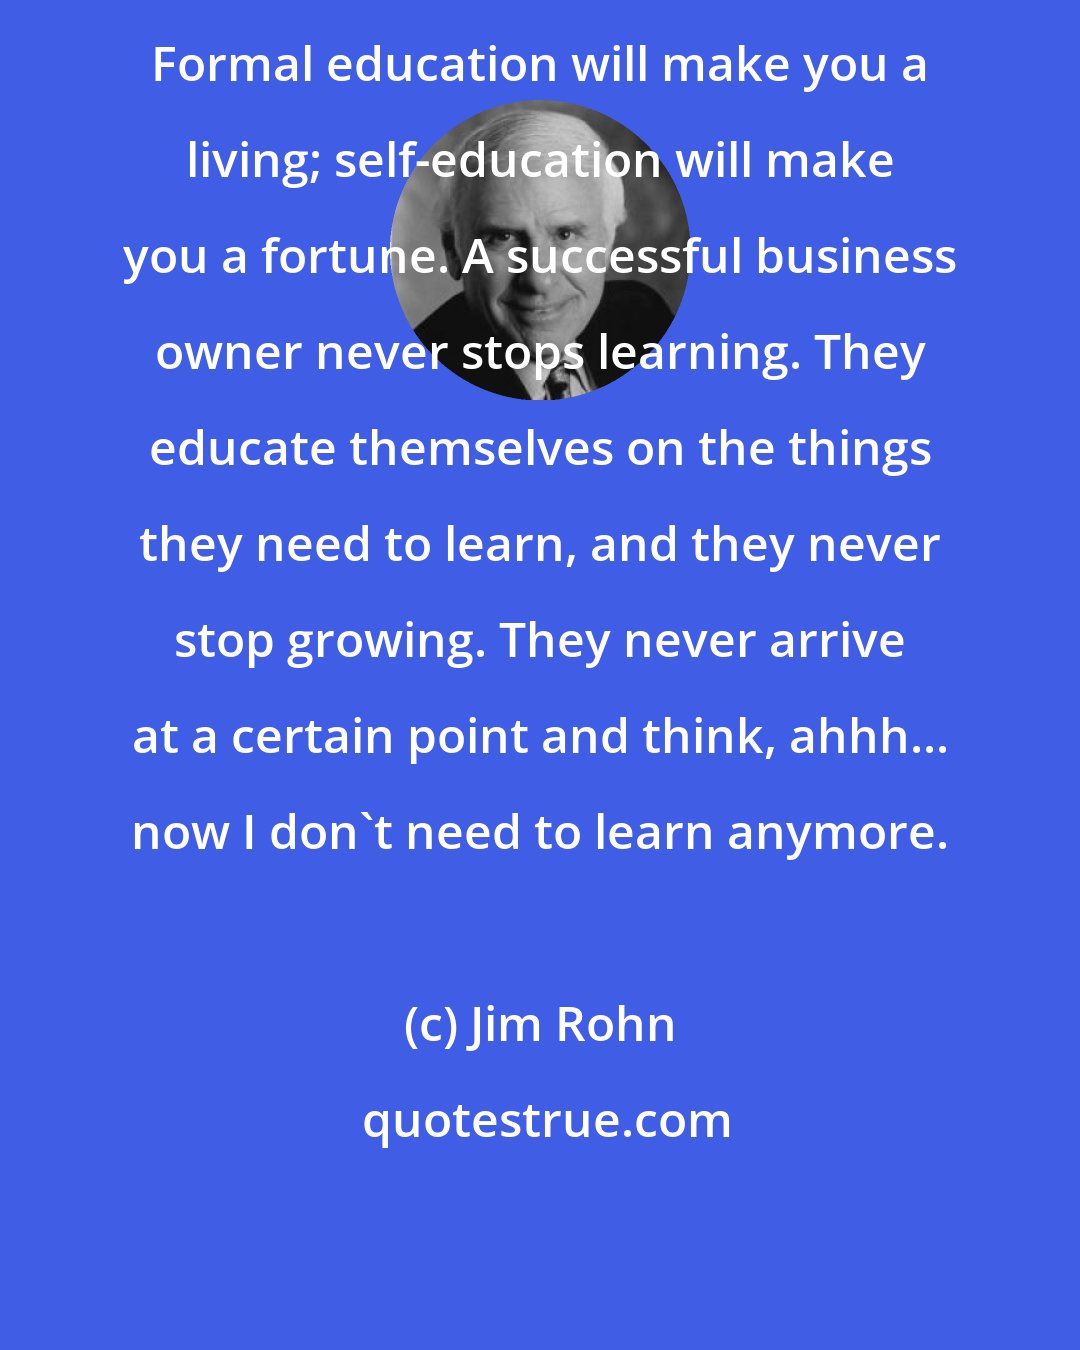 Jim Rohn: Formal education will make you a living; self-education will make you a fortune. A successful business owner never stops learning. They educate themselves on the things they need to learn, and they never stop growing. They never arrive at a certain point and think, ahhh... now I don't need to learn anymore.